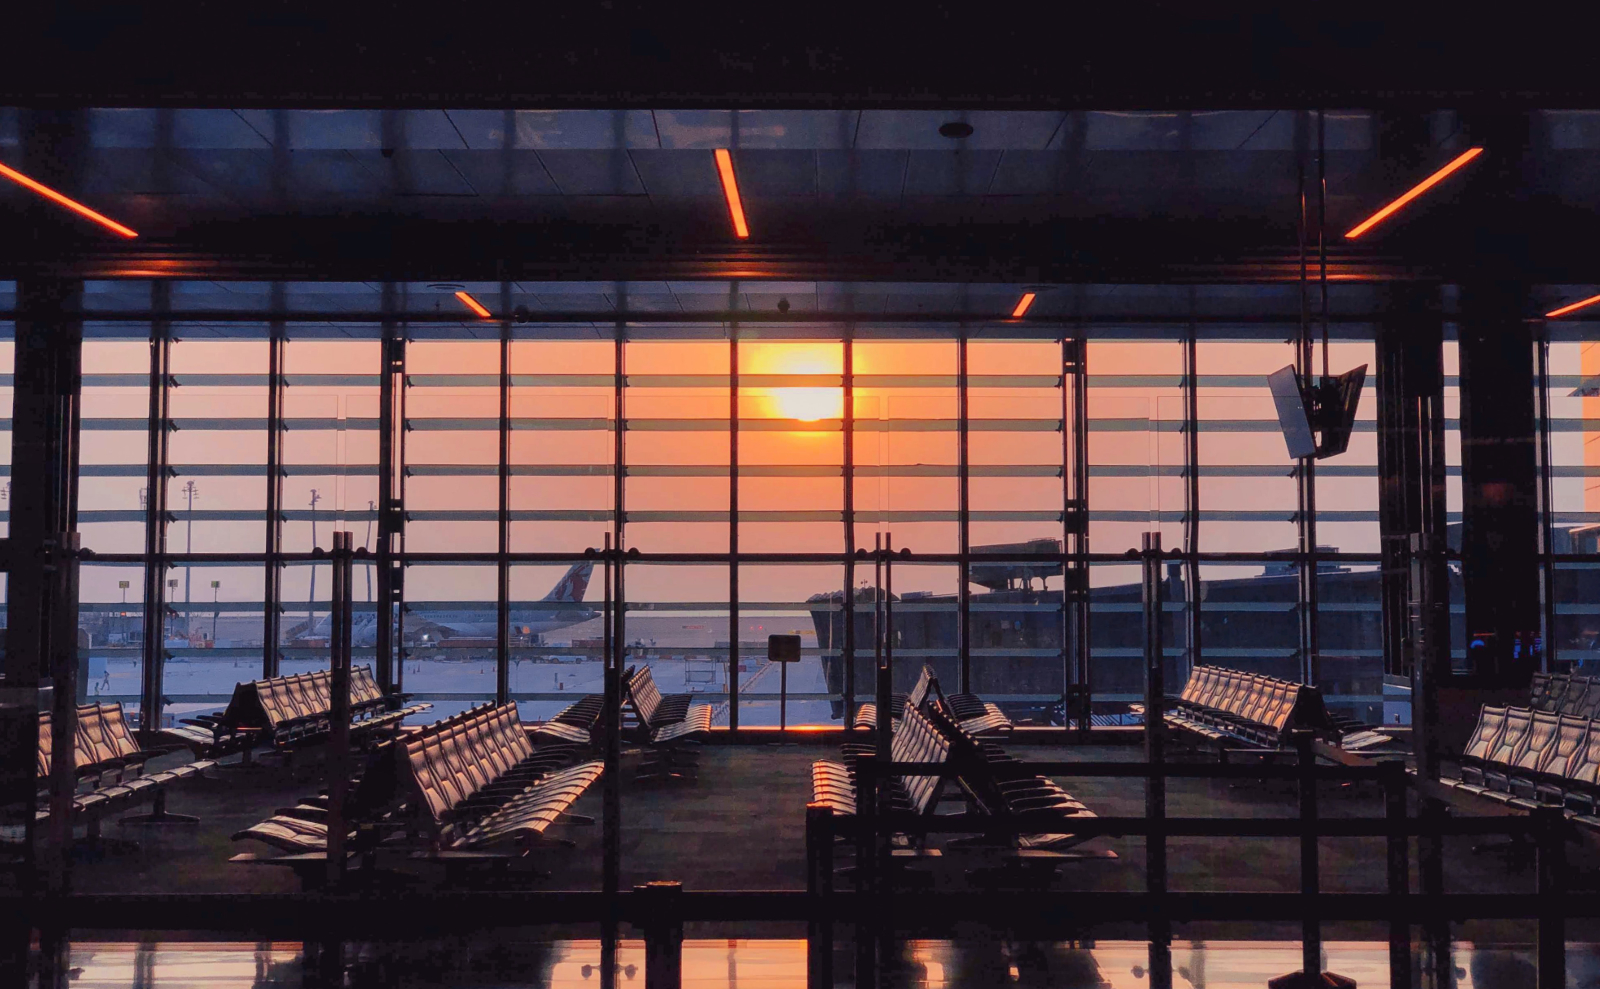 deserted airport at sunset